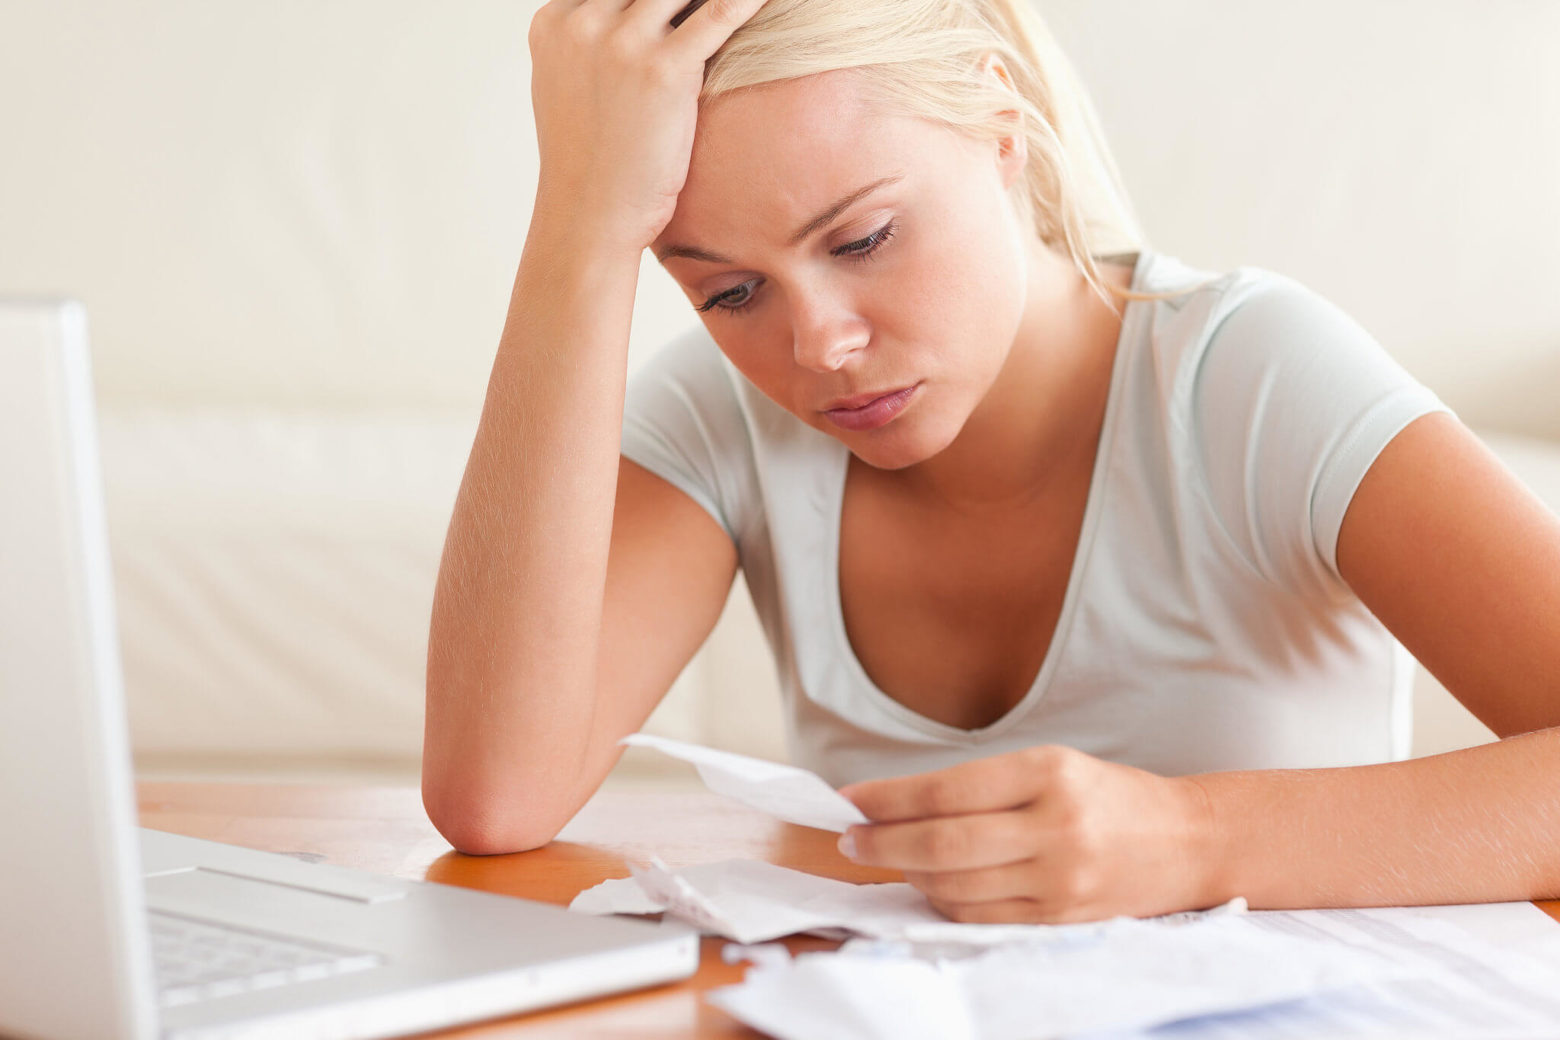 How Can Online Borrowing Support Financial Trouble?